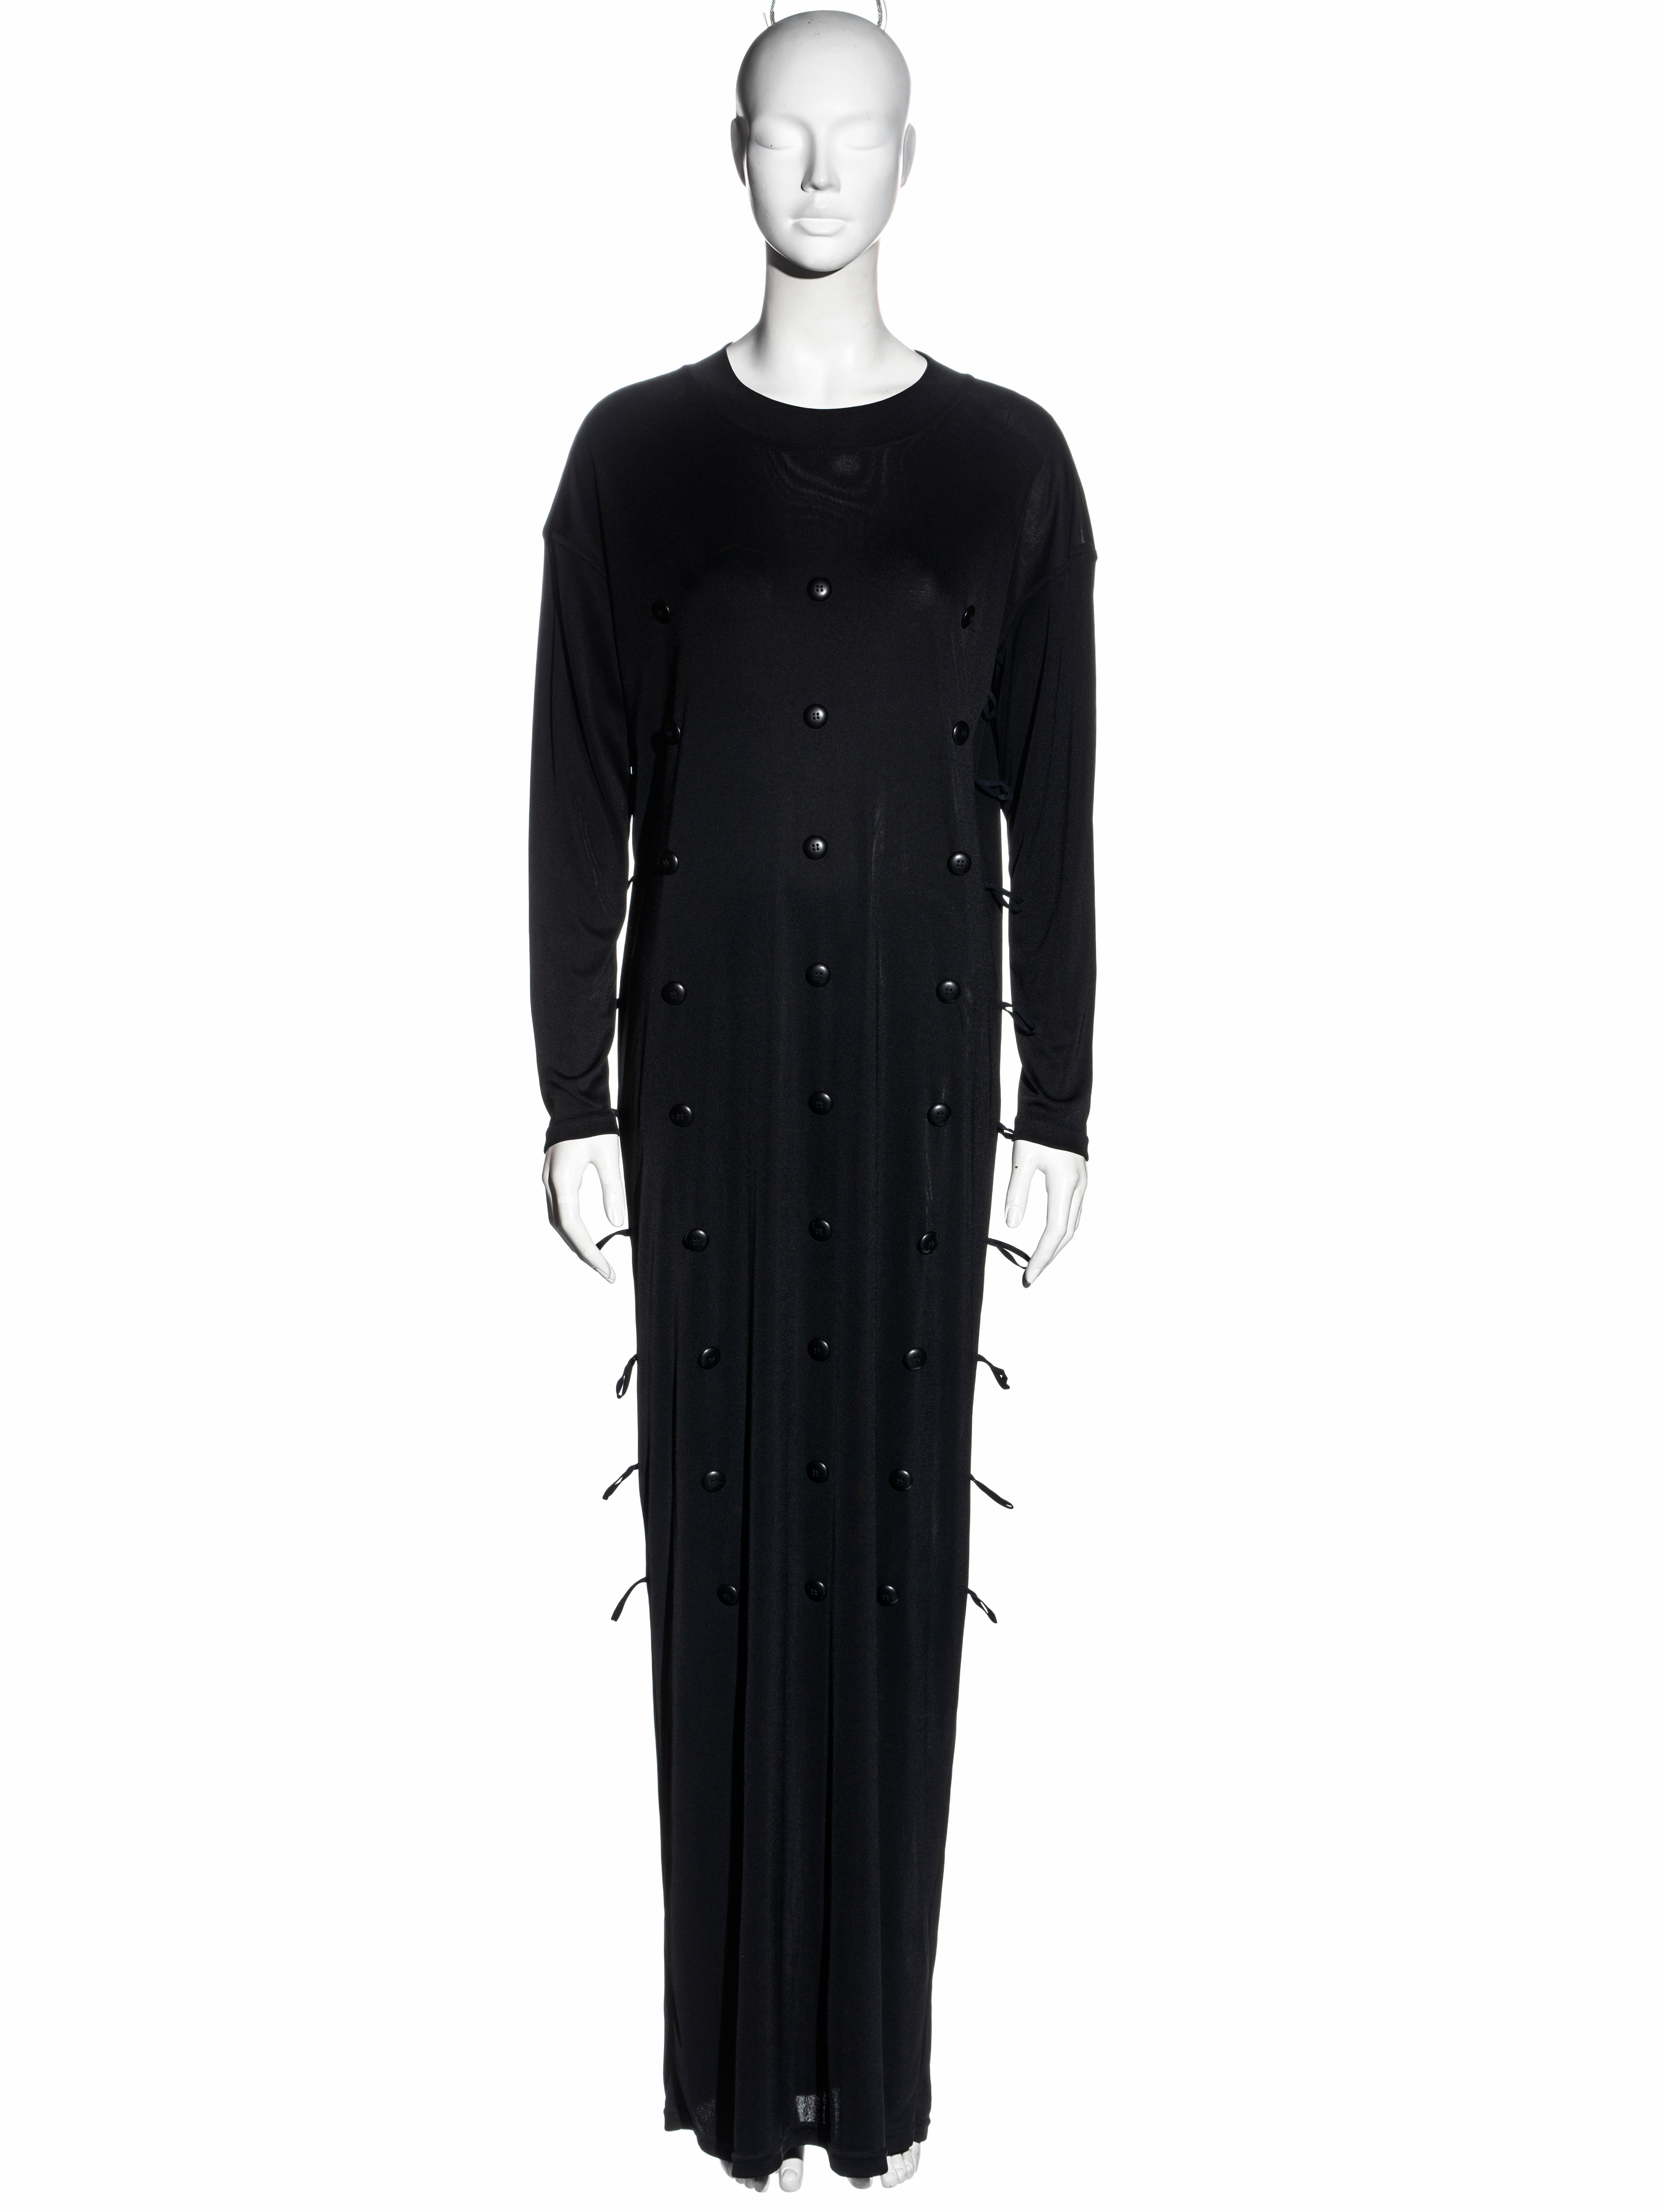 Black Dolce & Gabbana black jersey maxi dress with adjustable button closures, fw 1987 For Sale